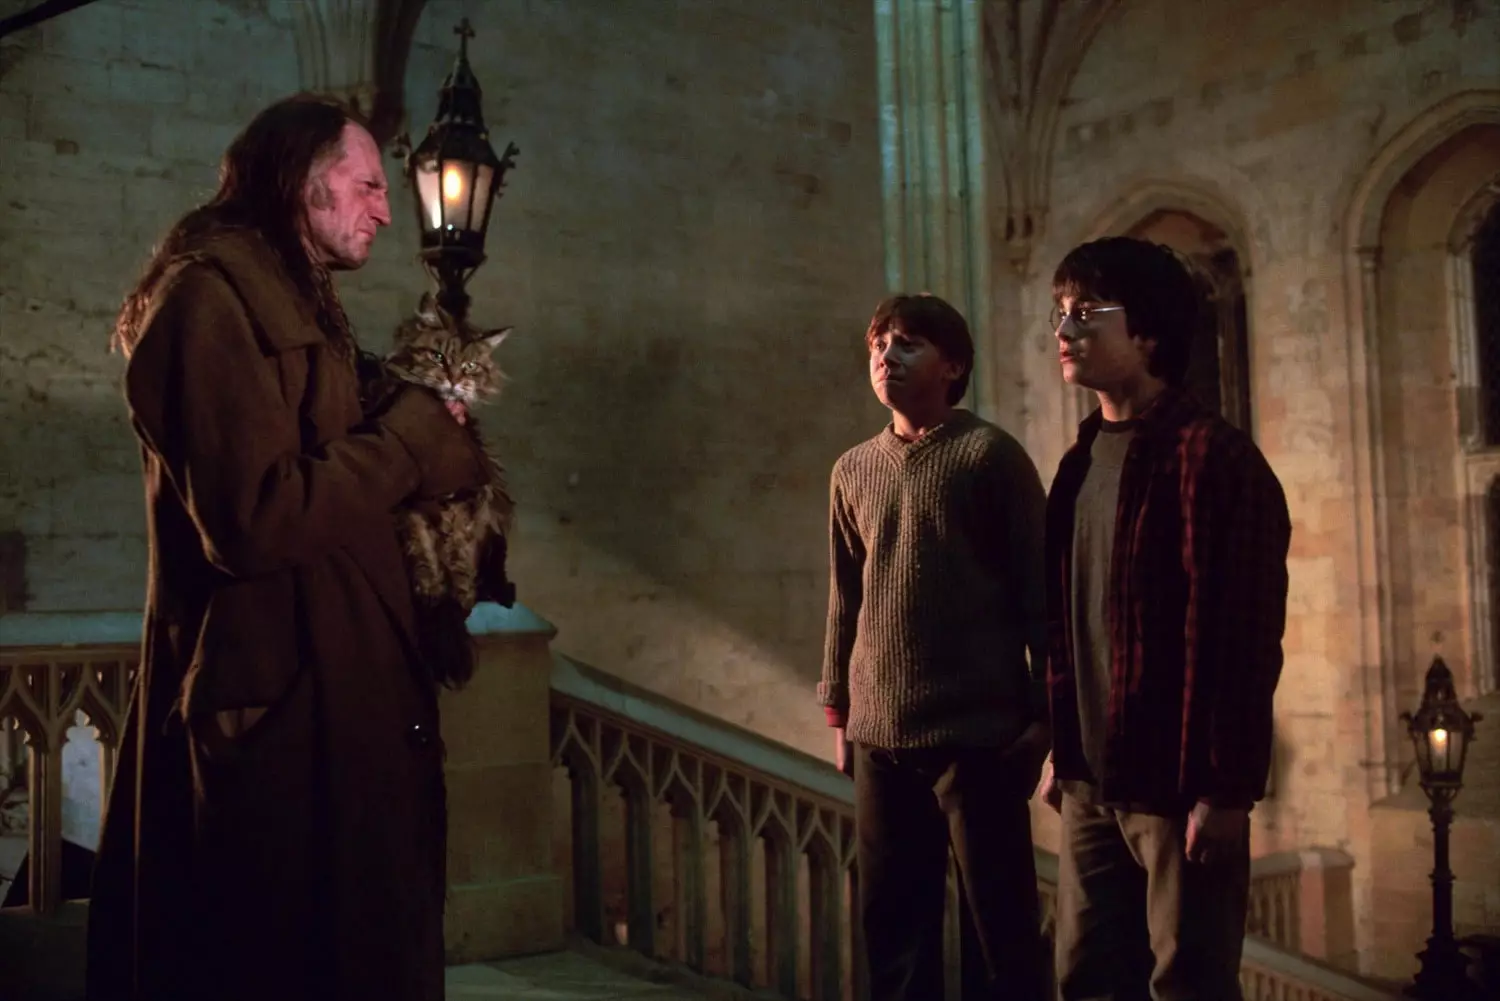 Filch regularly catches Harry and Ron breaking the rules (